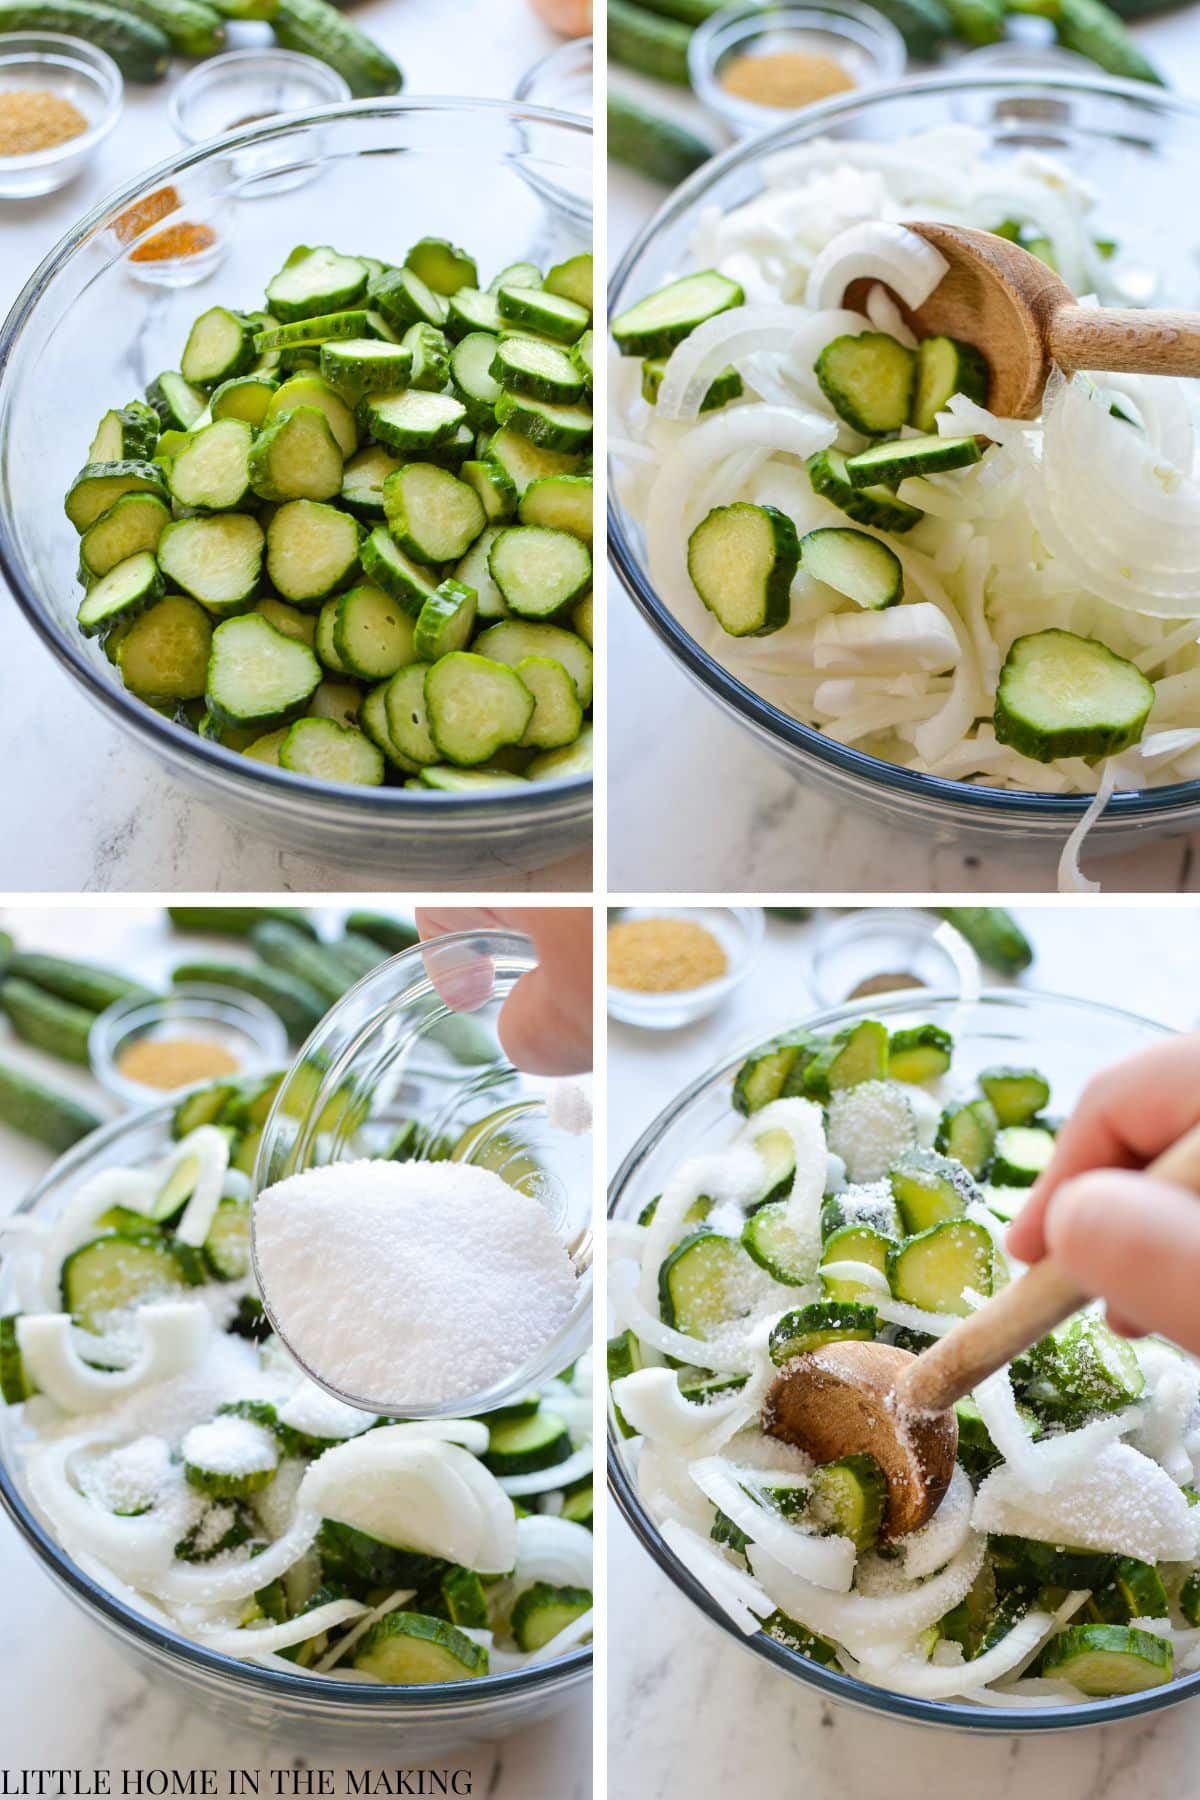 Stirring cucumbers and onions together with canning salt.